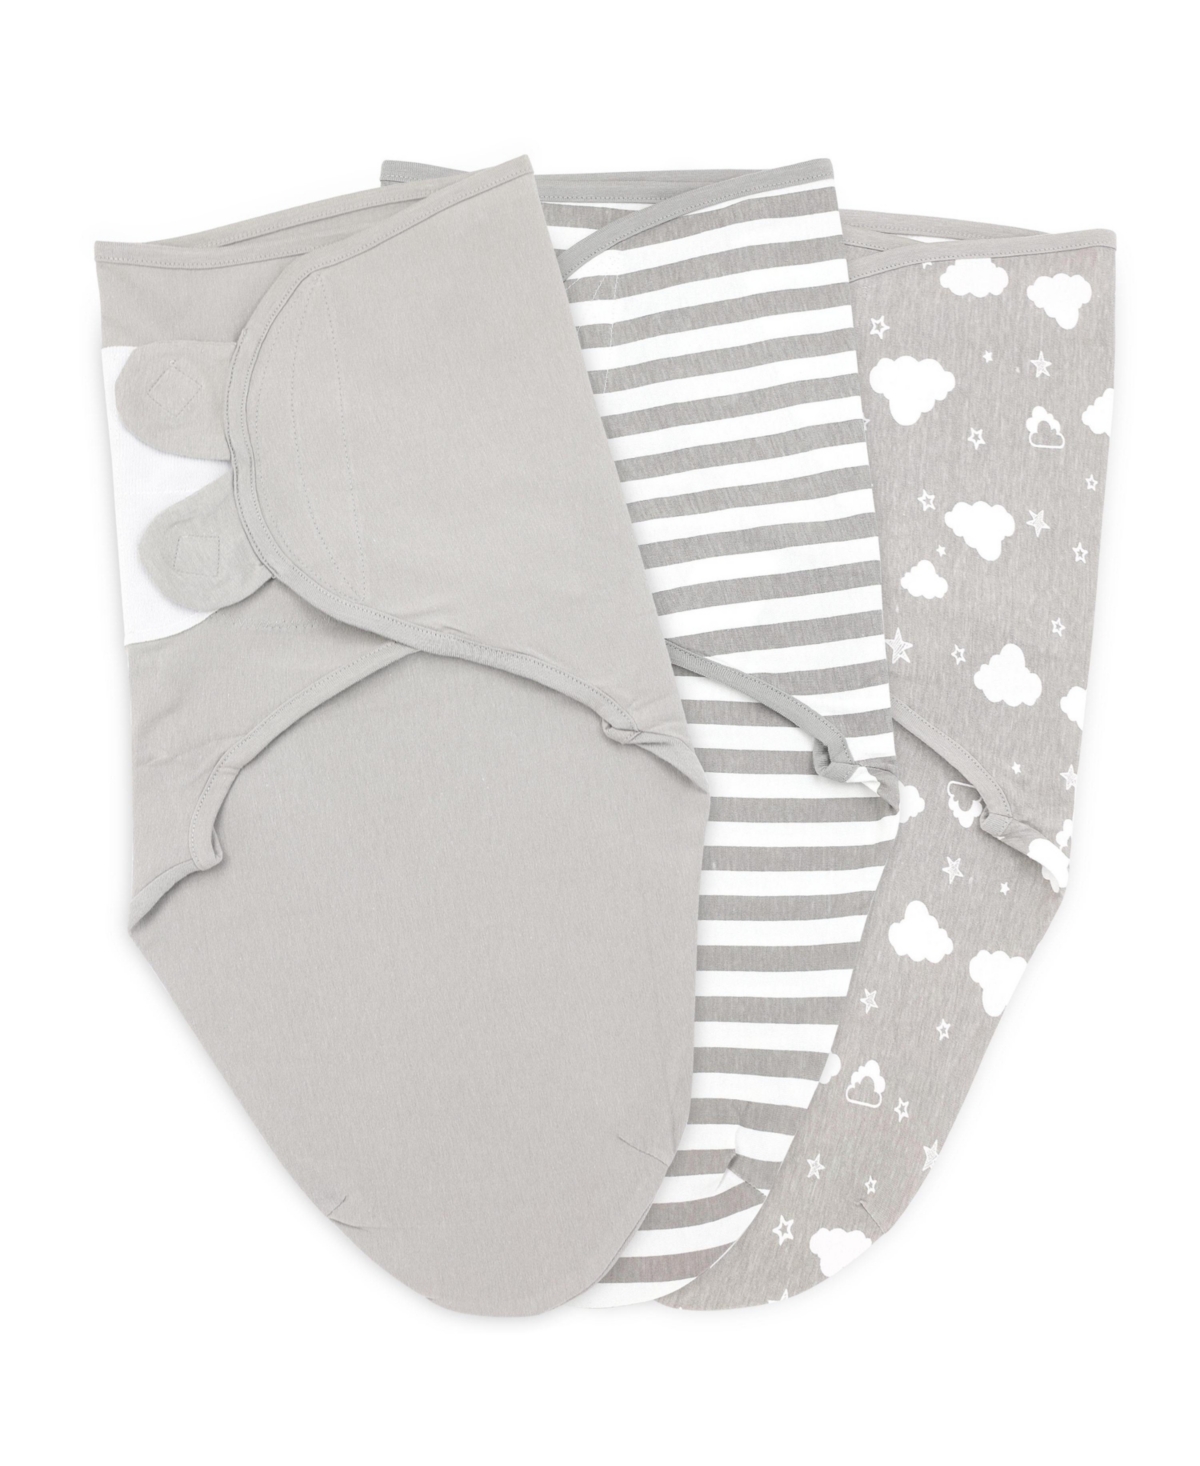 Bublo Baby Baby Swaddle Blanket Boy Girl, 3 Pack Large Size Newborn Swaddles 3-6 Month, Infant Adjustable Swadd In Grey